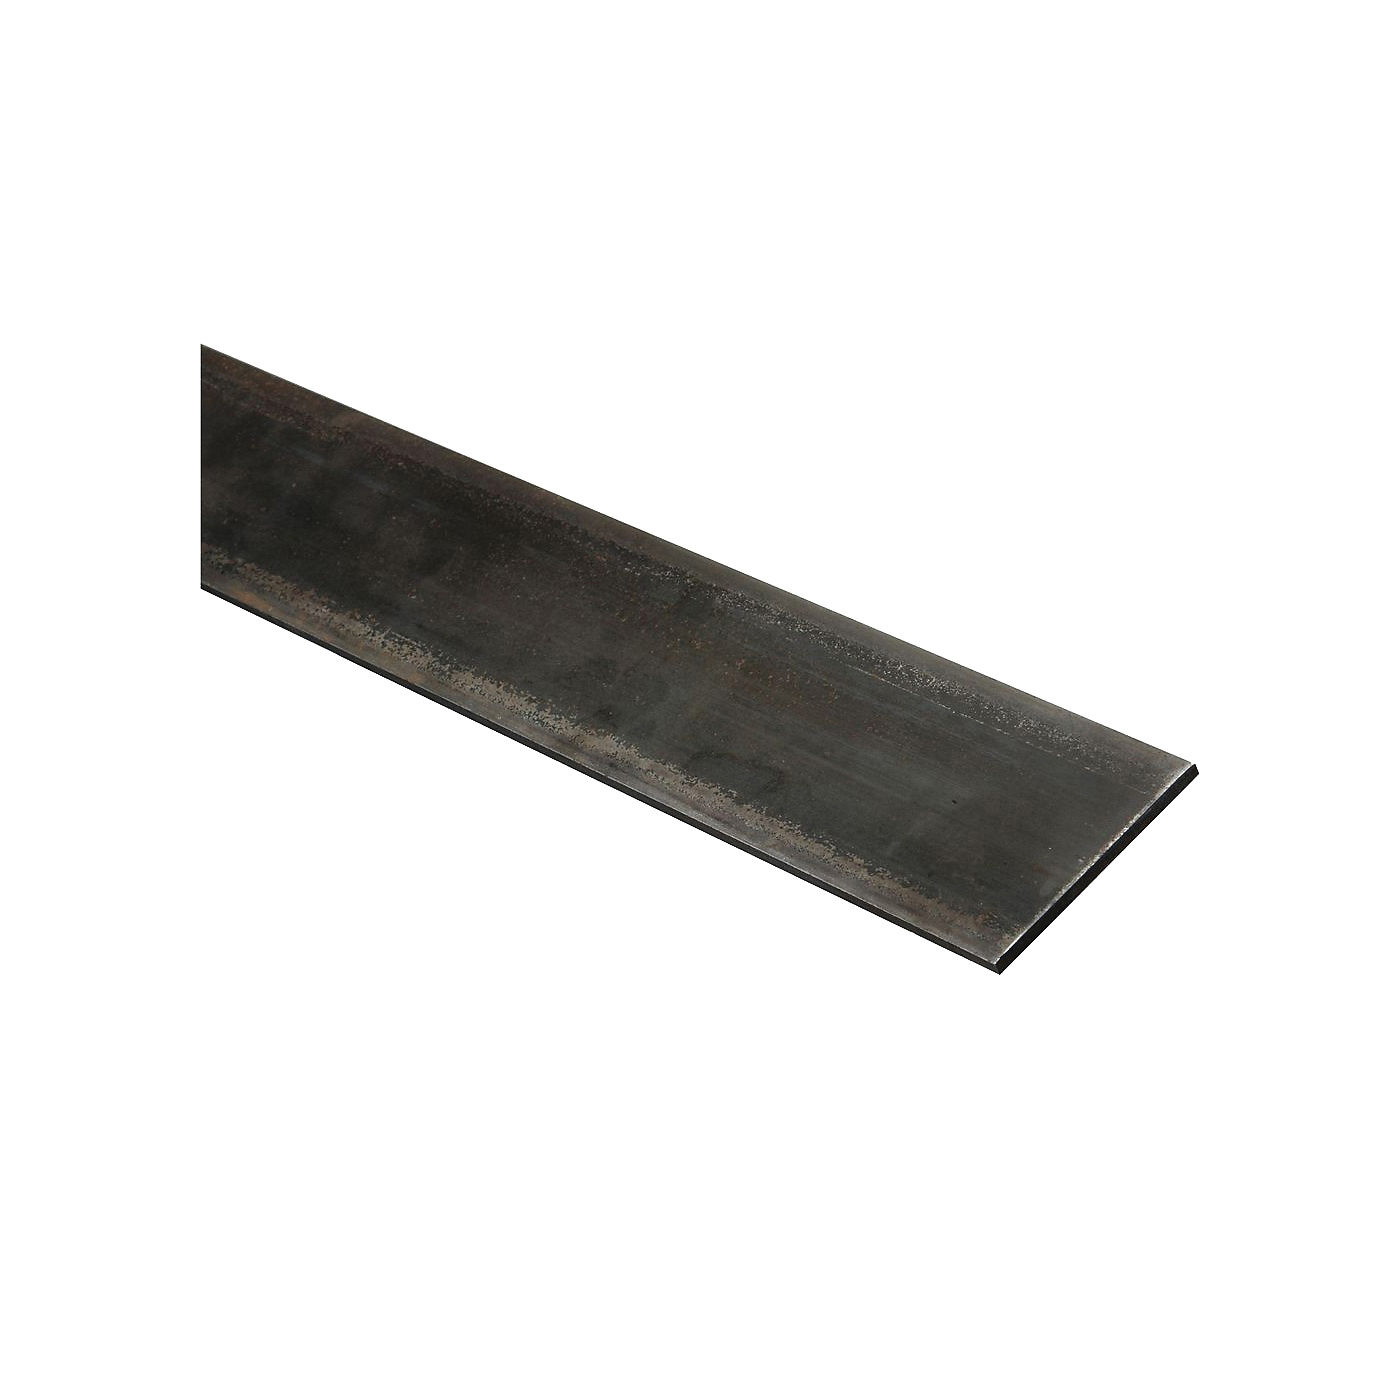 4063BC Series N301-416 Flat Stock, 3 in W, 36 in L, 3/16 in Thick, Steel